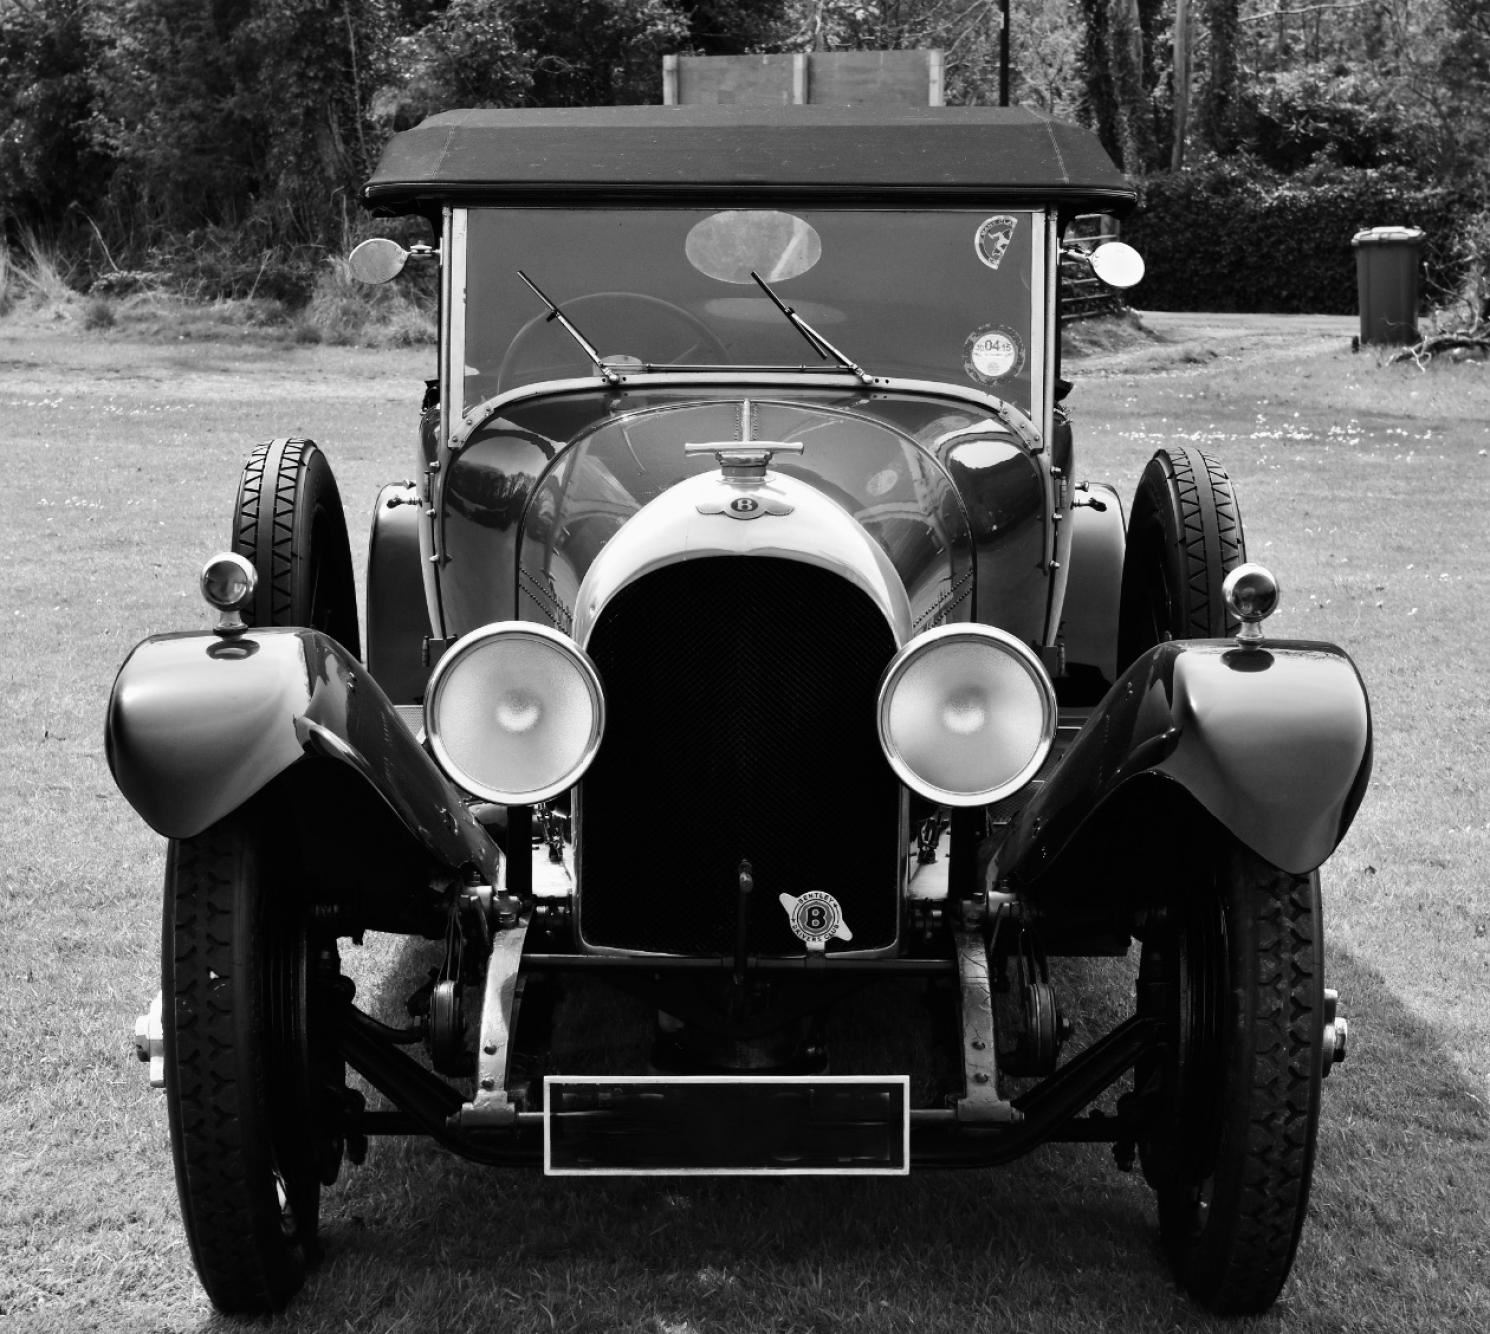 Bentley 3 litre plhdmy4mdvcp7xeti9dio